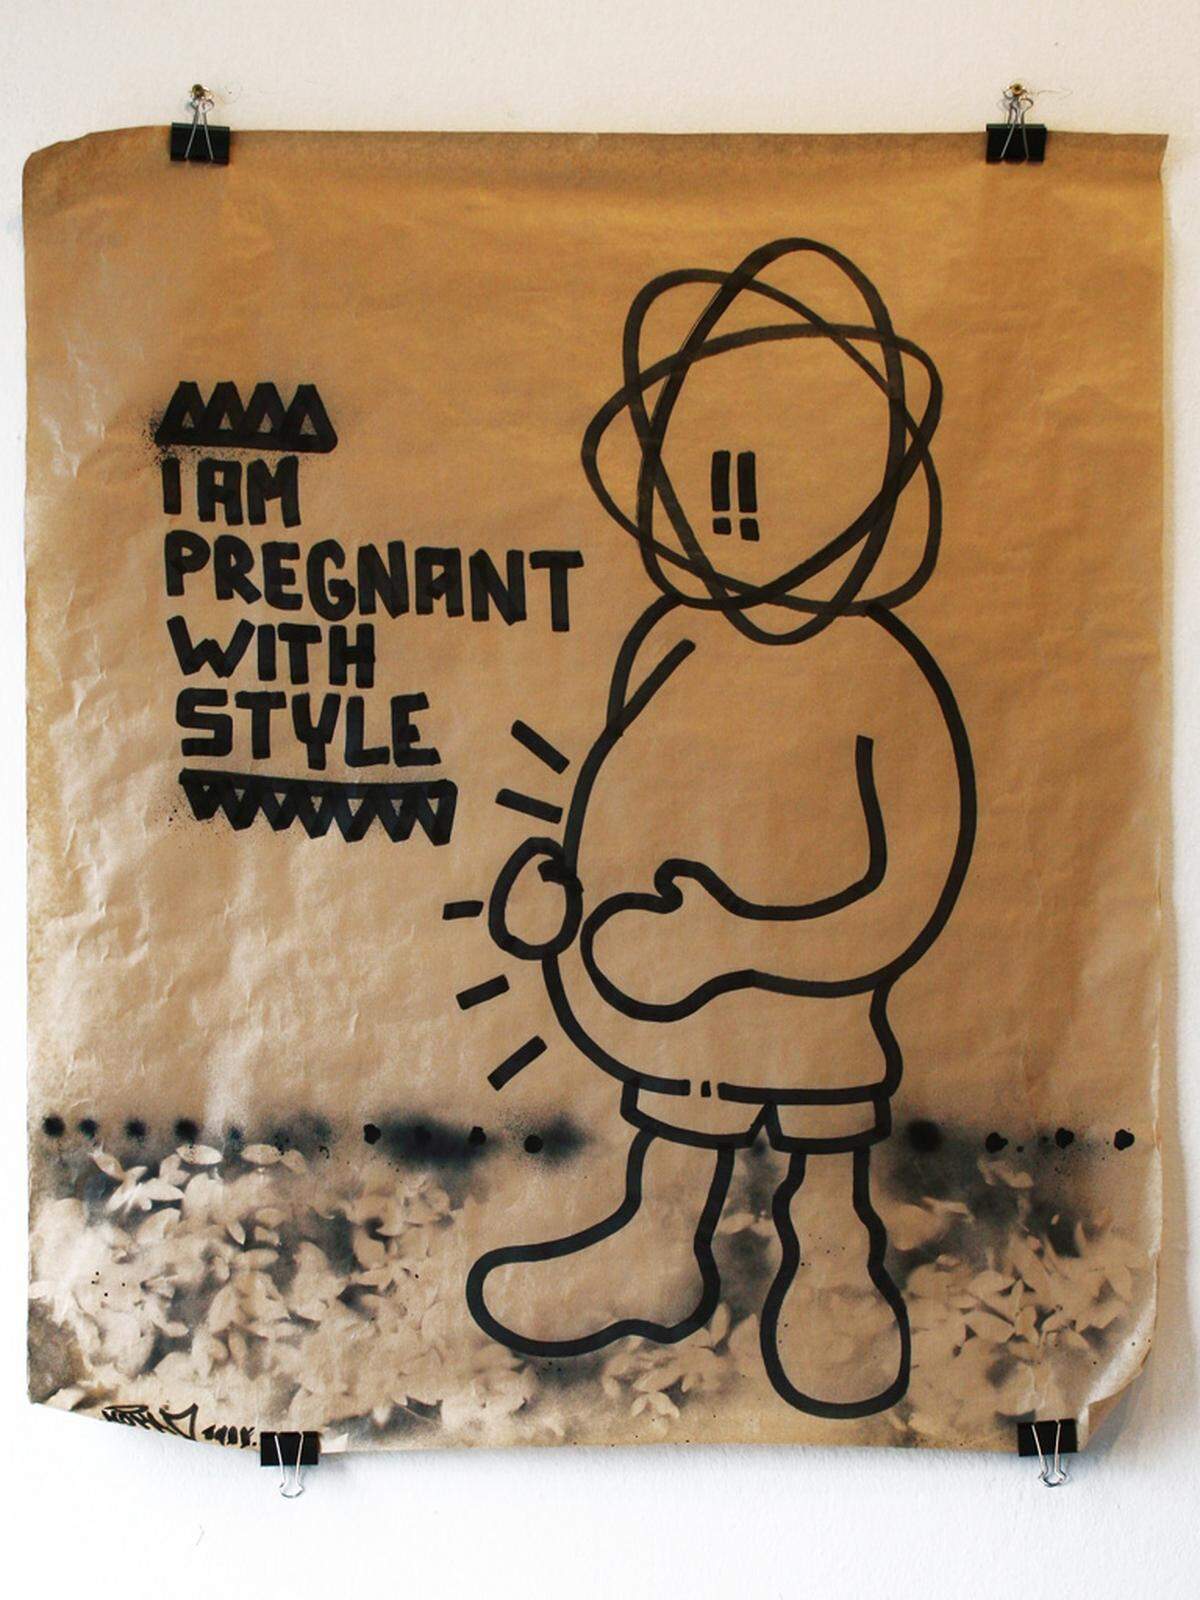 "I am pregnant with style"